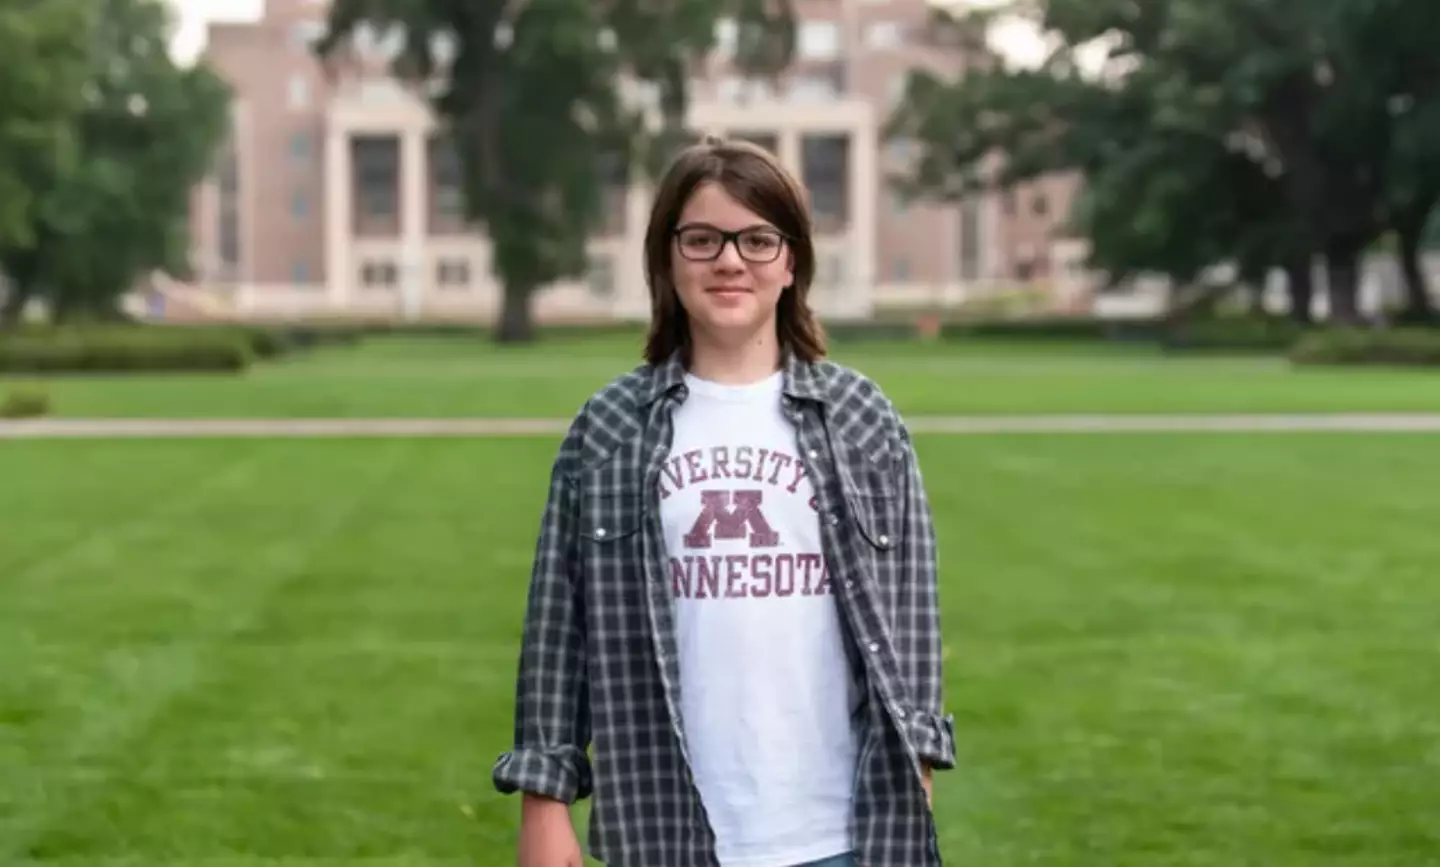 Elliott Tanner is graduating from The University of Minnesota at the age of 13.